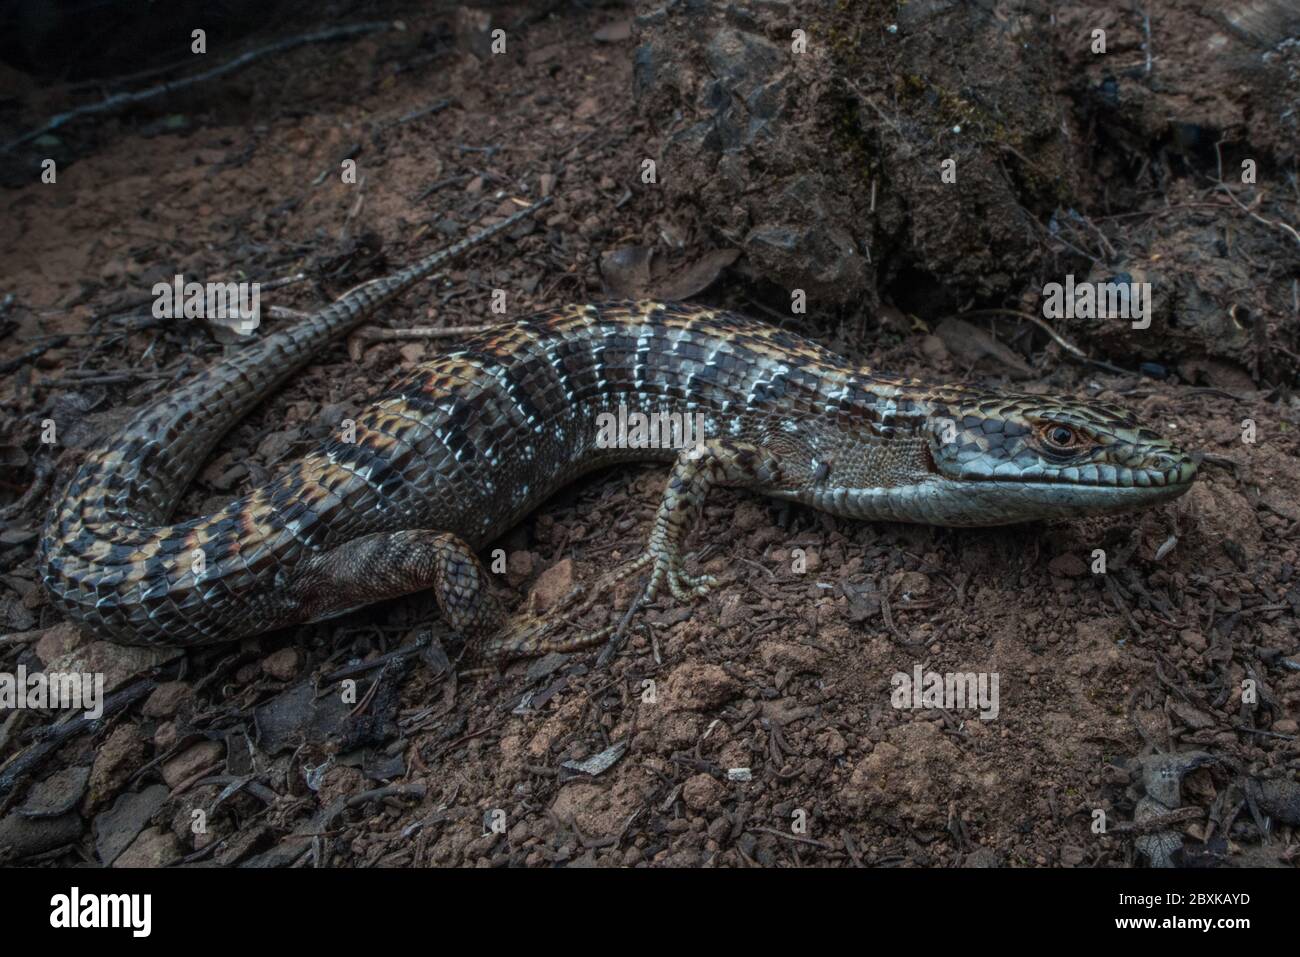 Elgaria multicarinata, the southern alligator lizard from the West coast of North America. Stock Photo